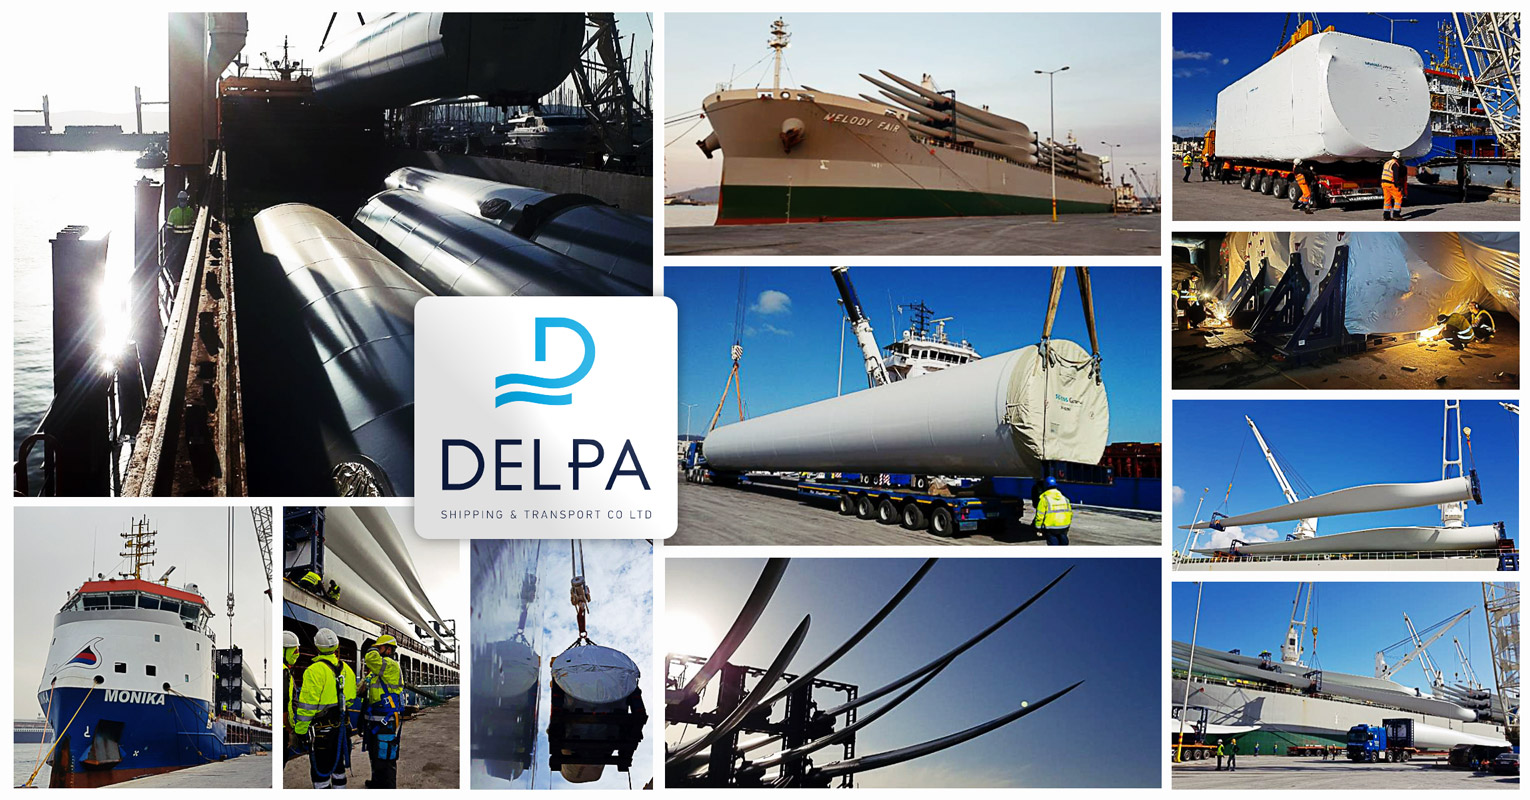 Delpa Handled Two Wind Turbine Projects via 7 vessels, Moving 21 WTG Sets with Blades as Long as 72m and Nacelles Weighing up to 101mt